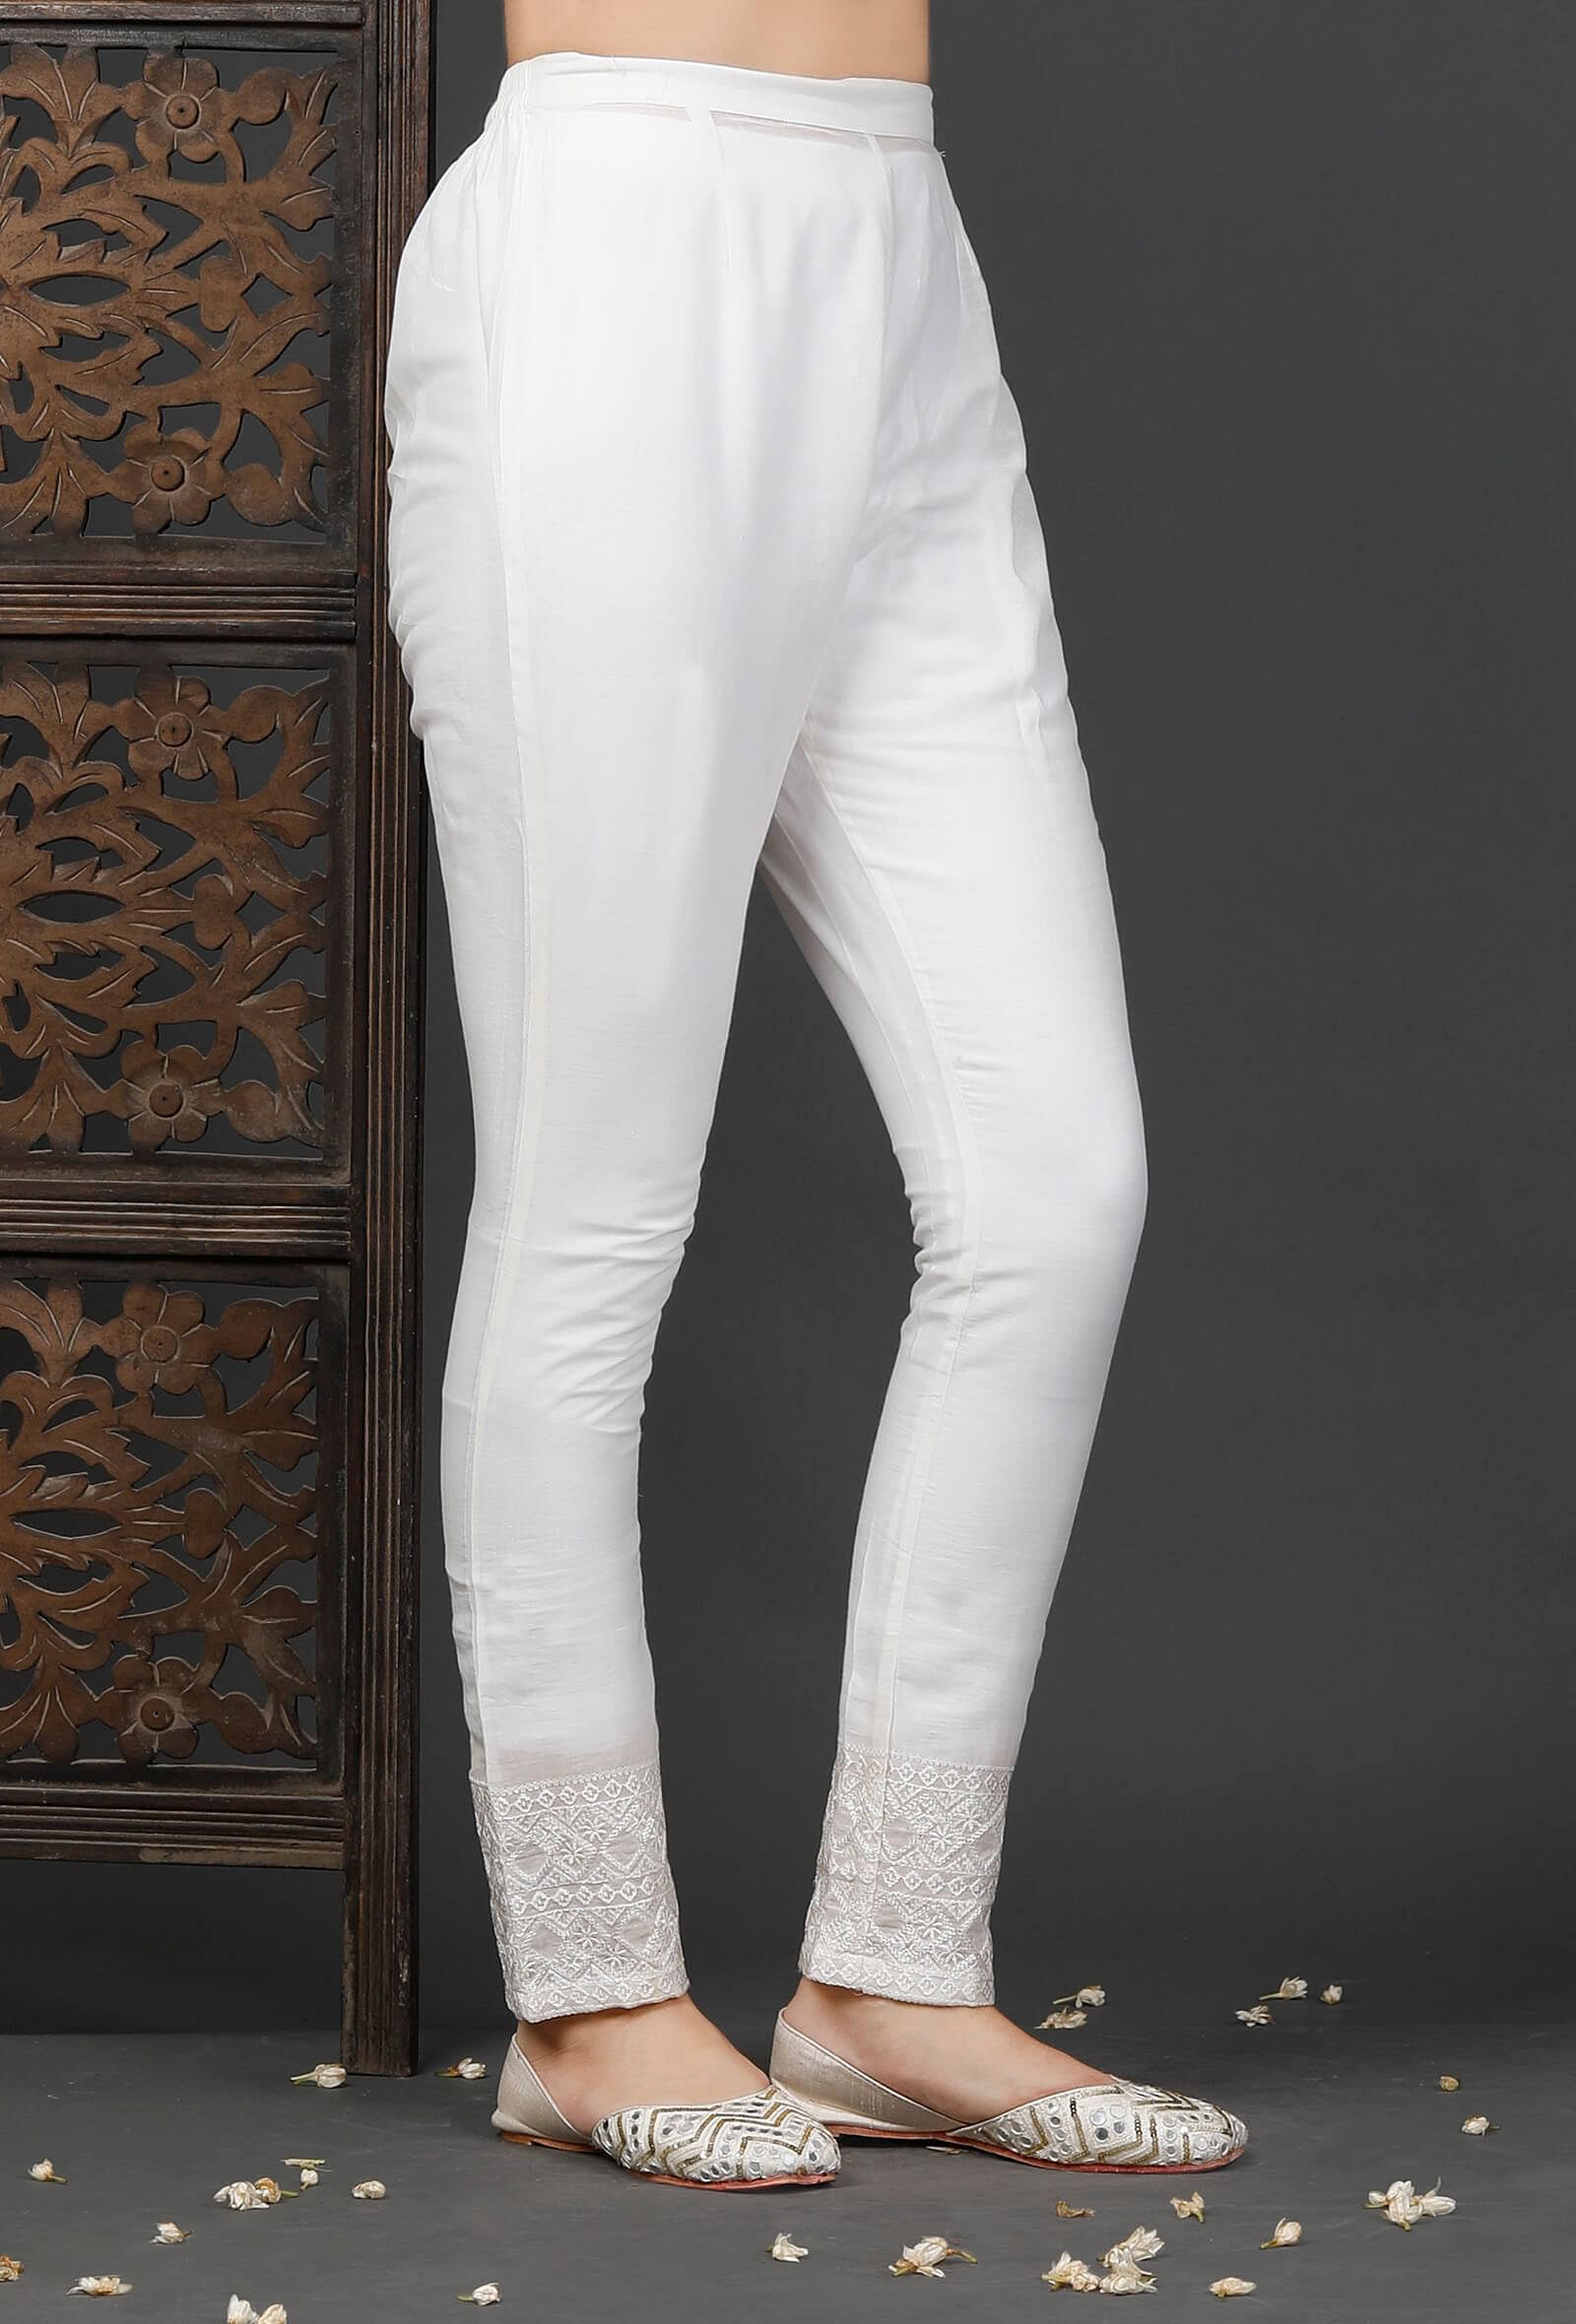 Buy Marshmallow White Solid Slim Pants Online - Shop for W